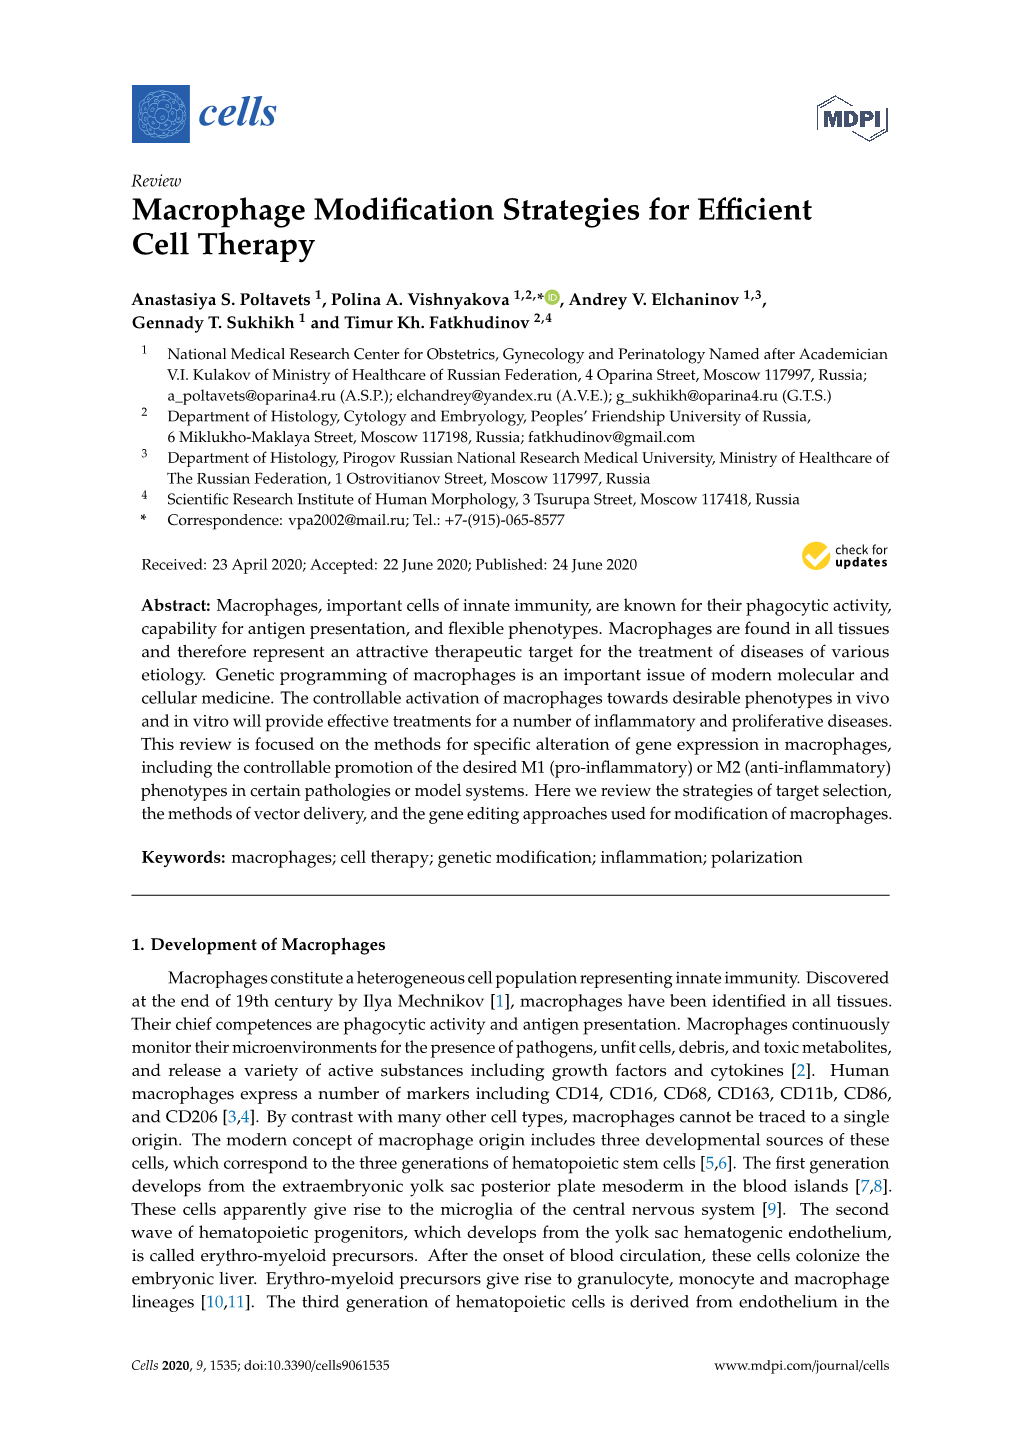 Macrophage Modification Strategies for Efficient Cell Therapy